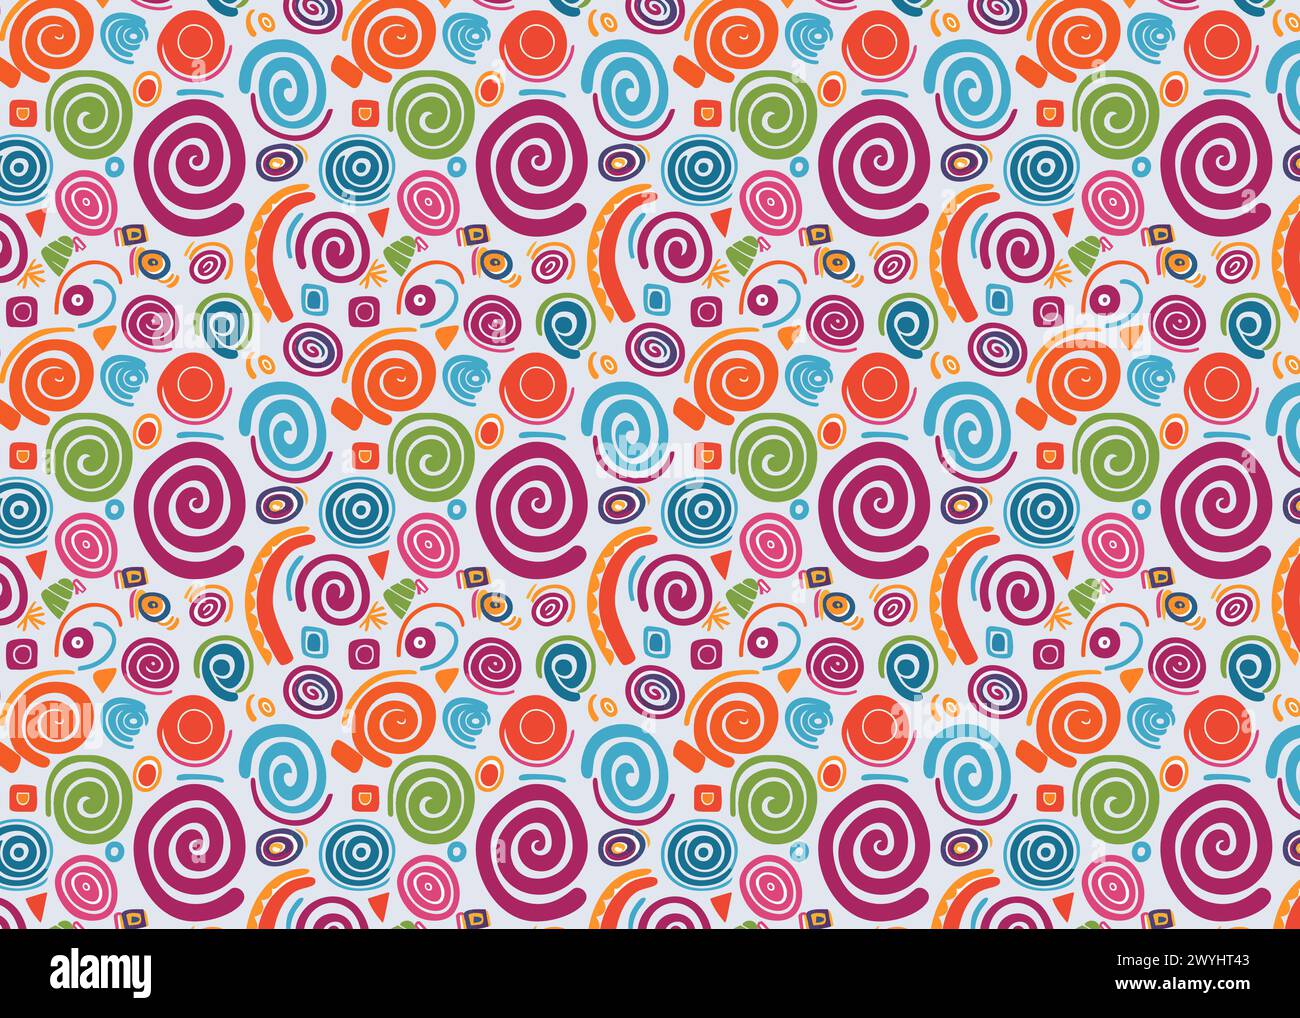 Seamless pattern with colorful spirals. Hand drawn swirls vector background. Stock Vector